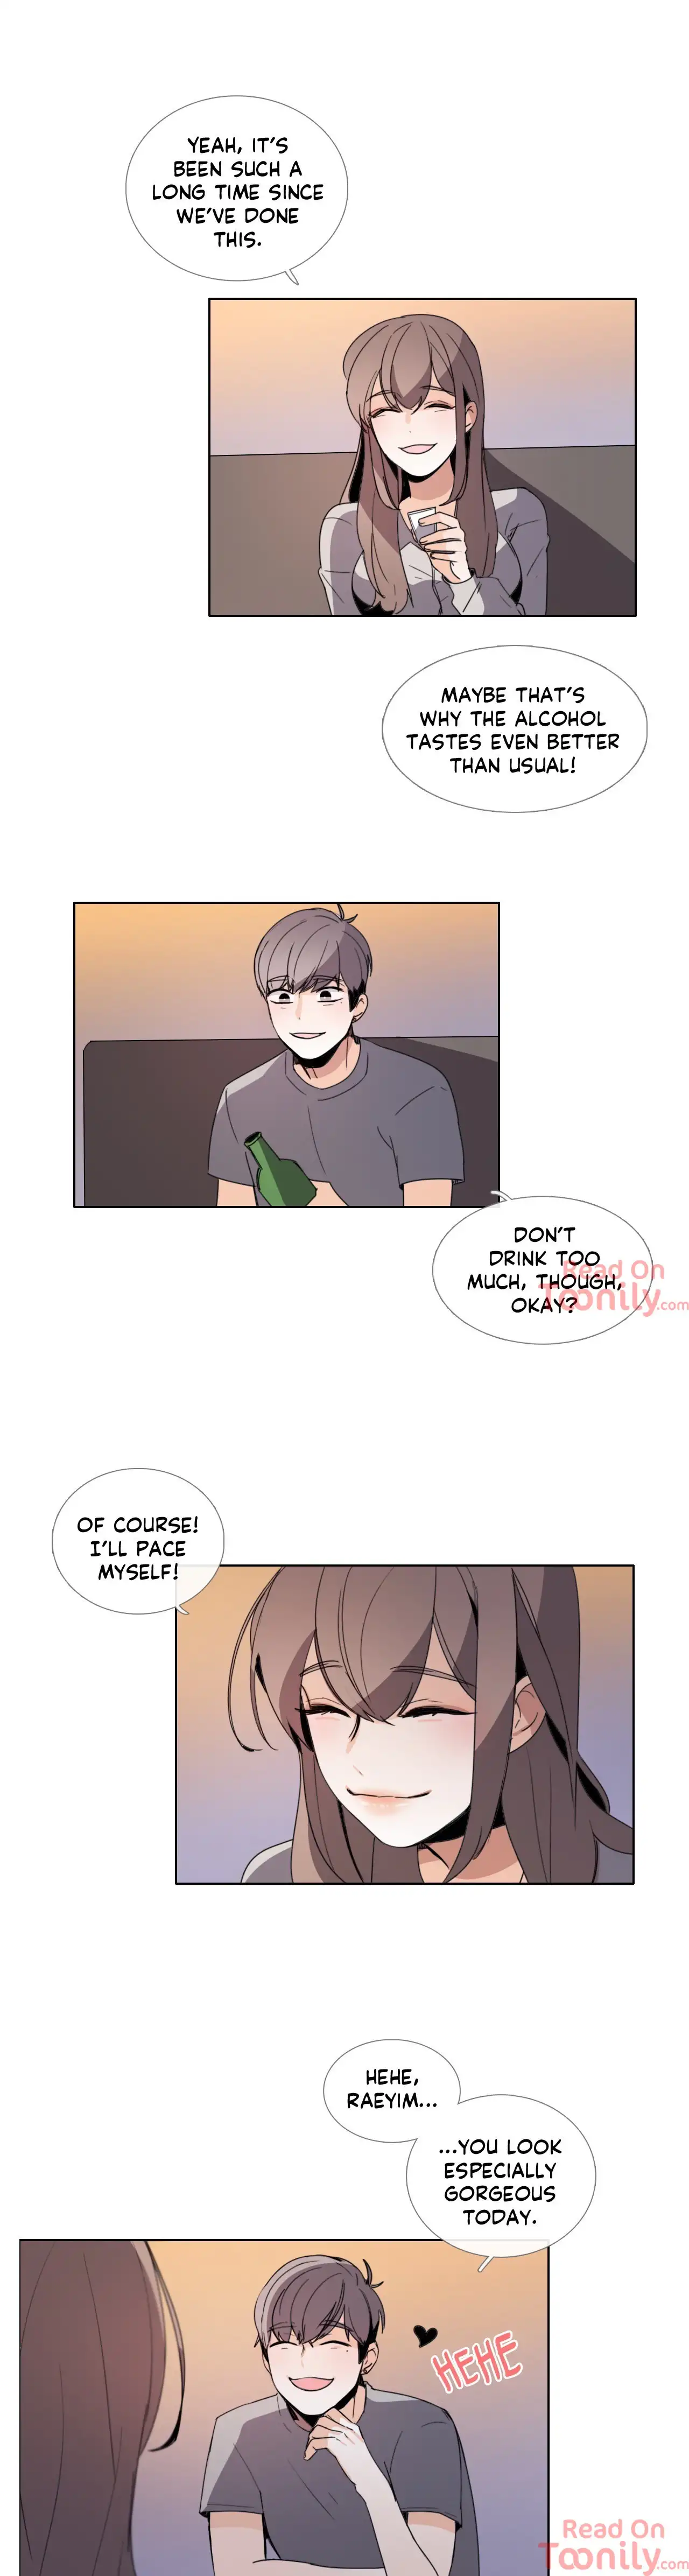 Talk to Me - Chapter 78 Page 5